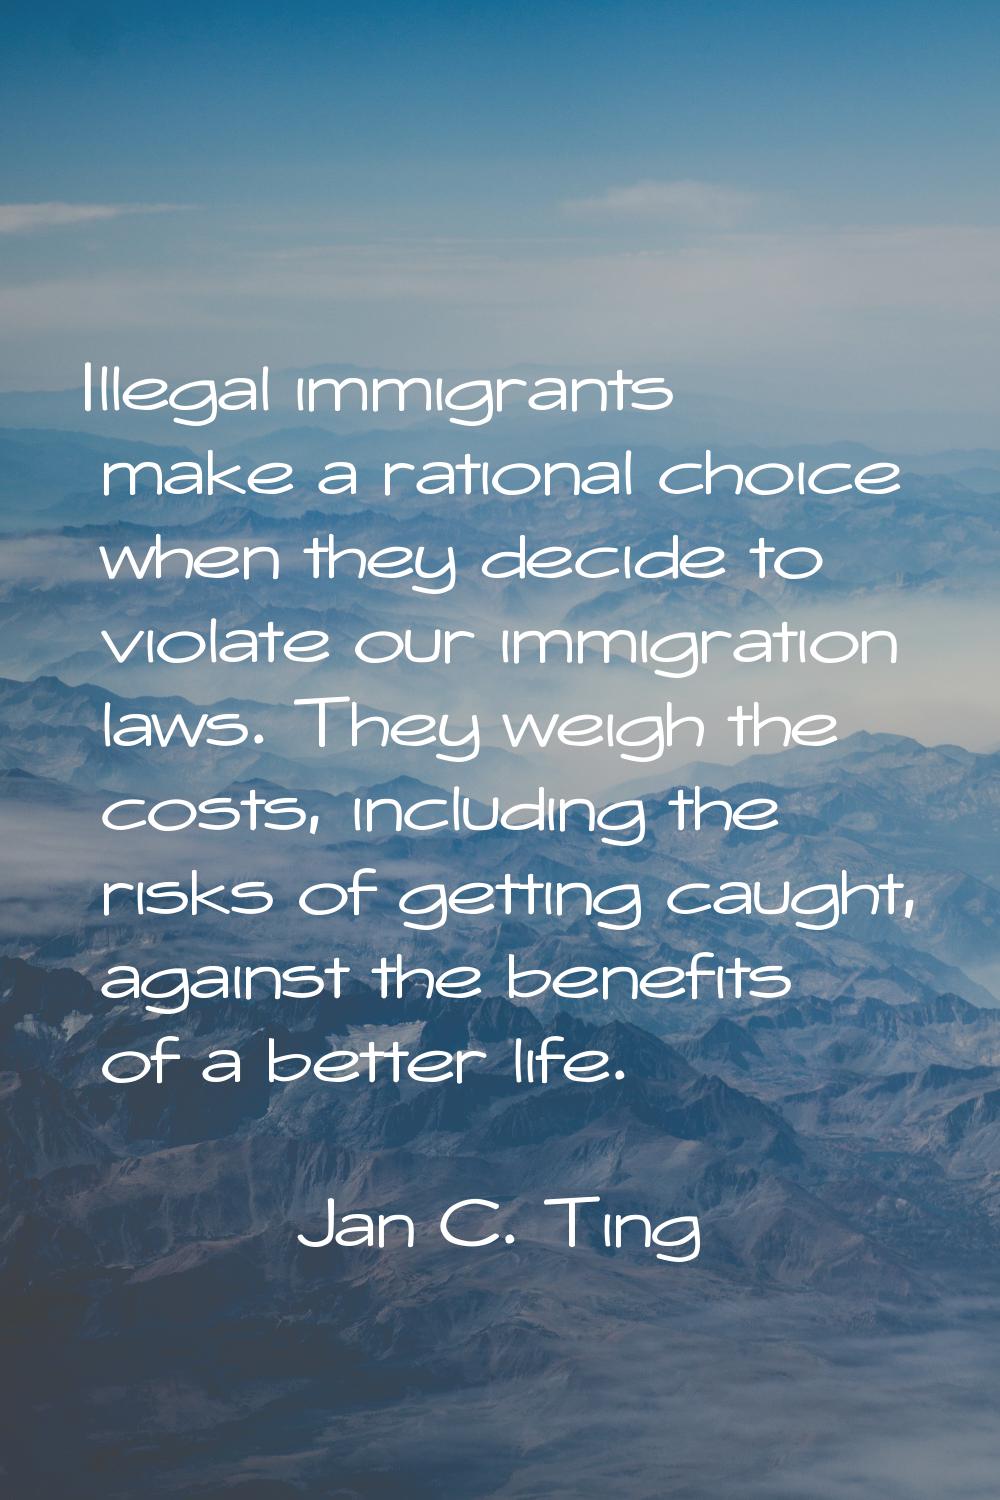 Illegal immigrants make a rational choice when they decide to violate our immigration laws. They we